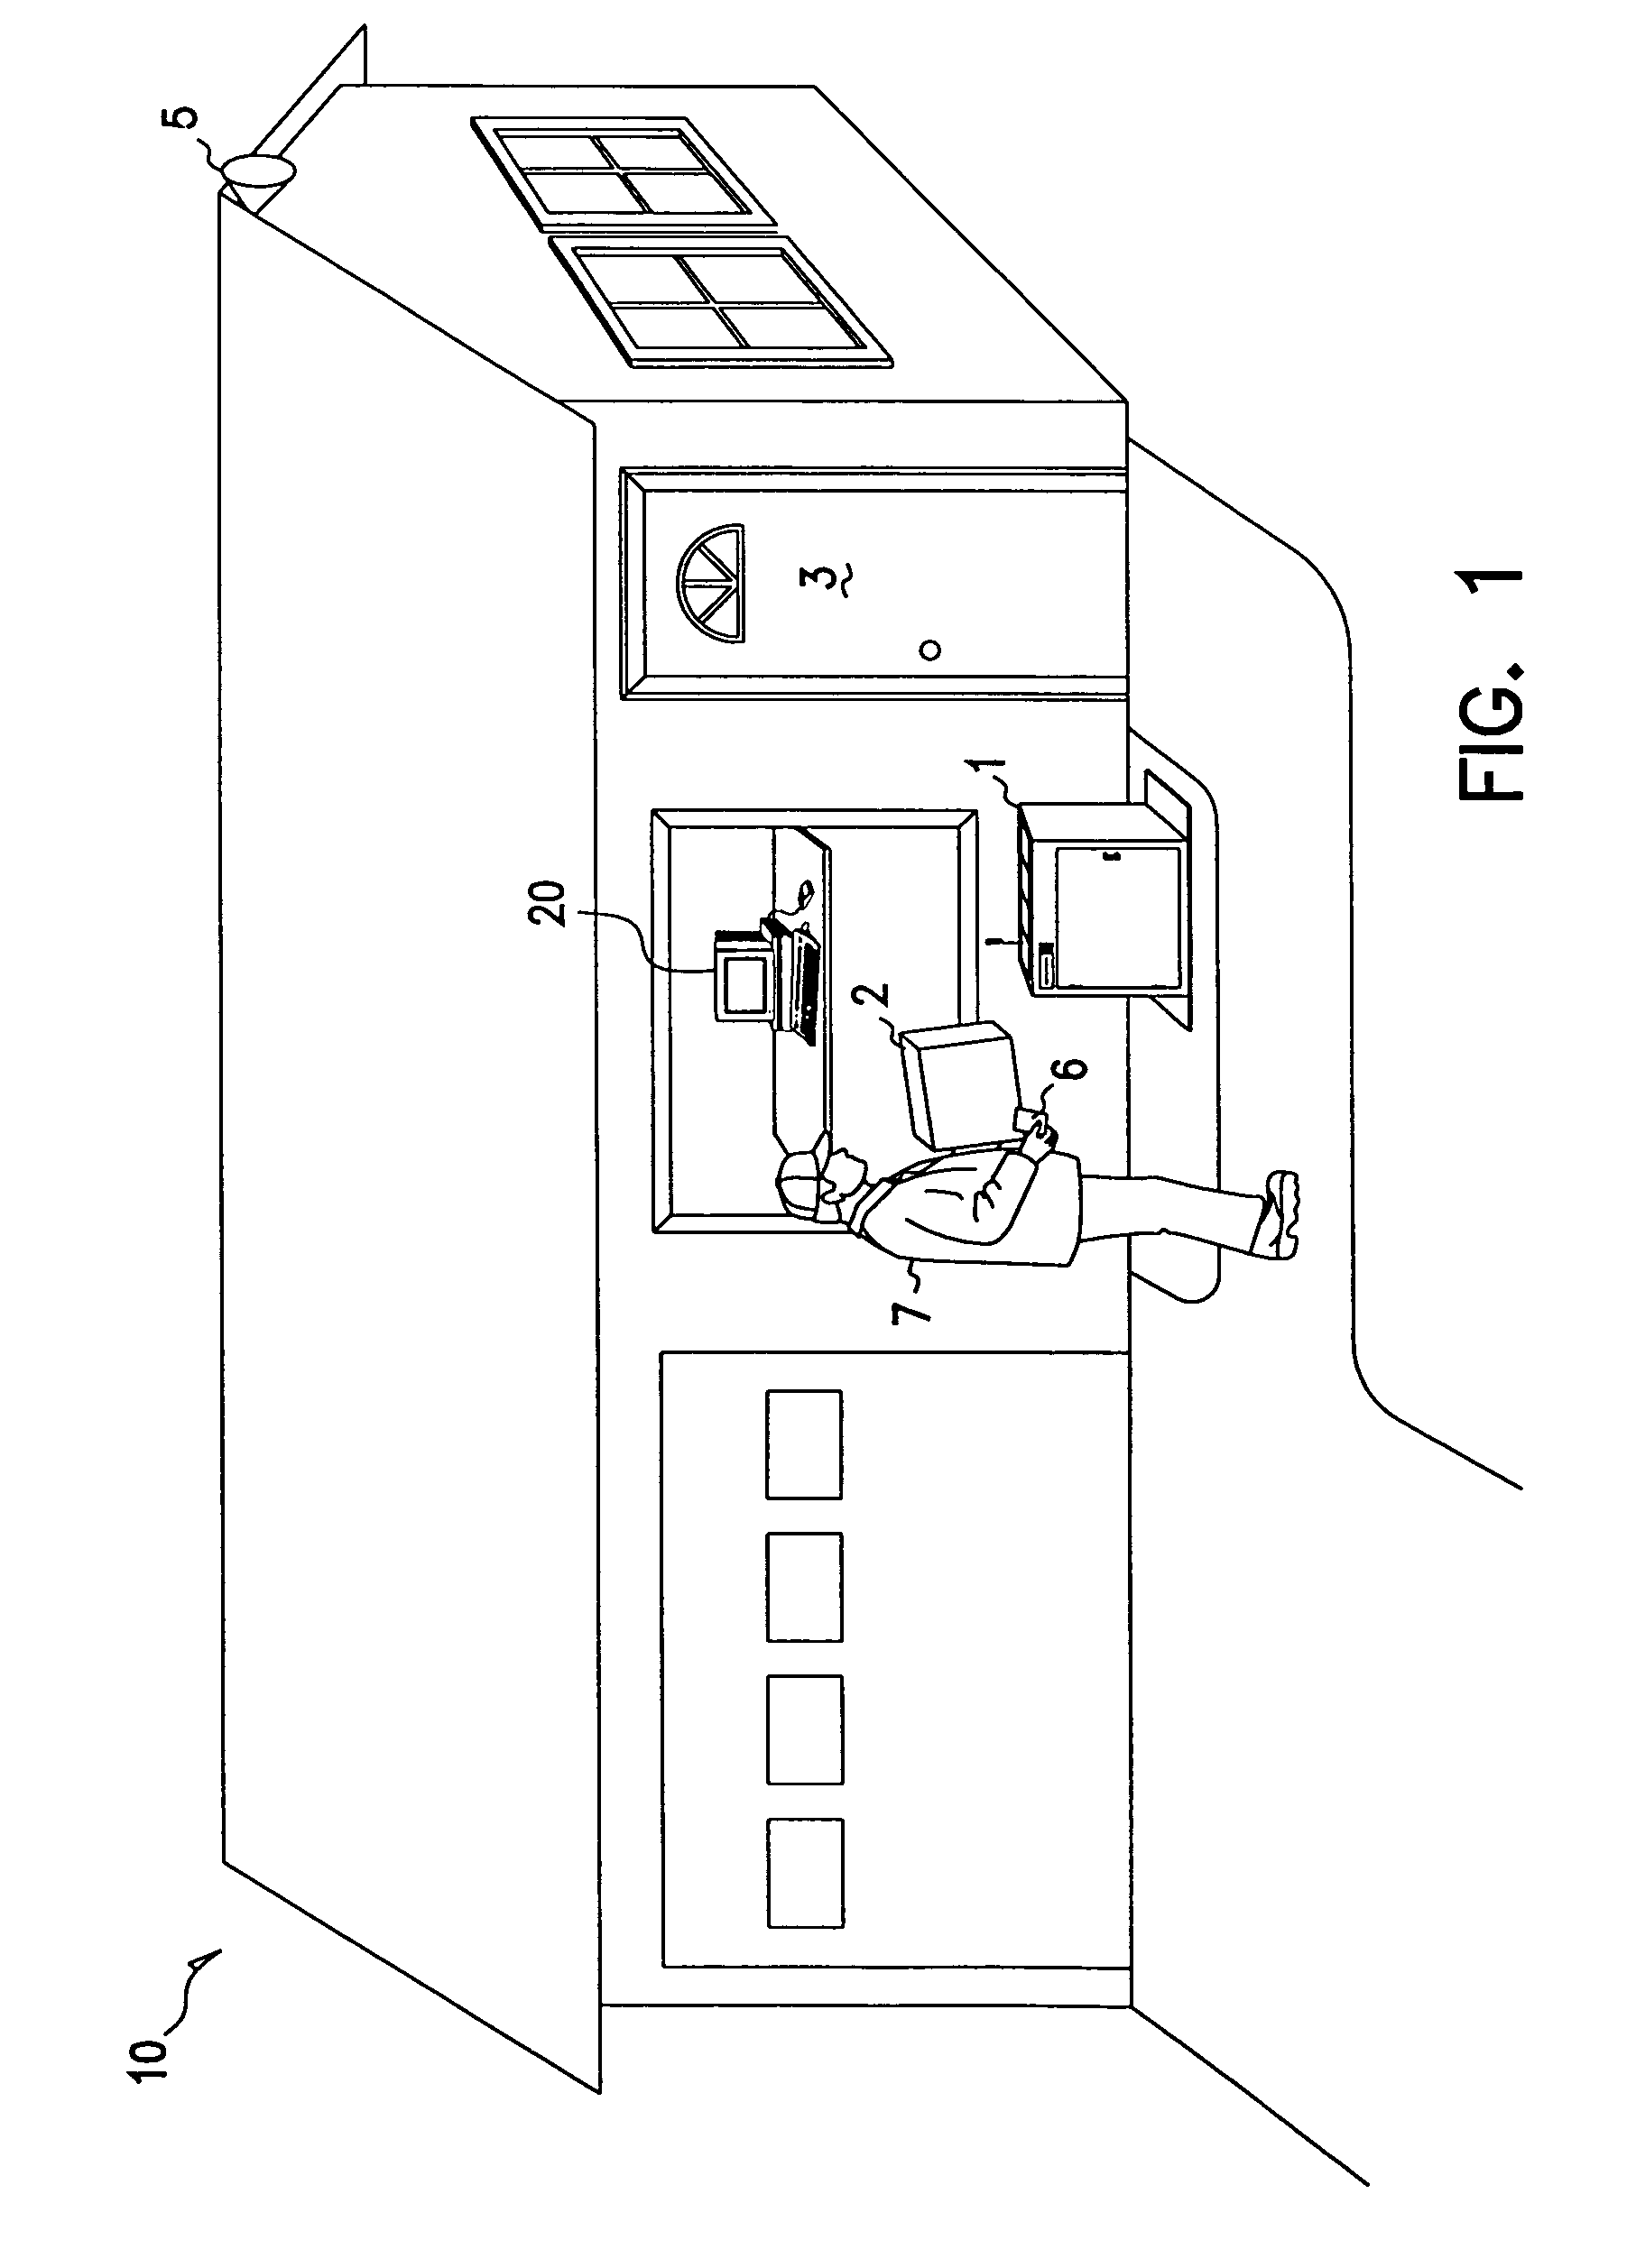 Methods and apparatus for unattended pickups and deliveries